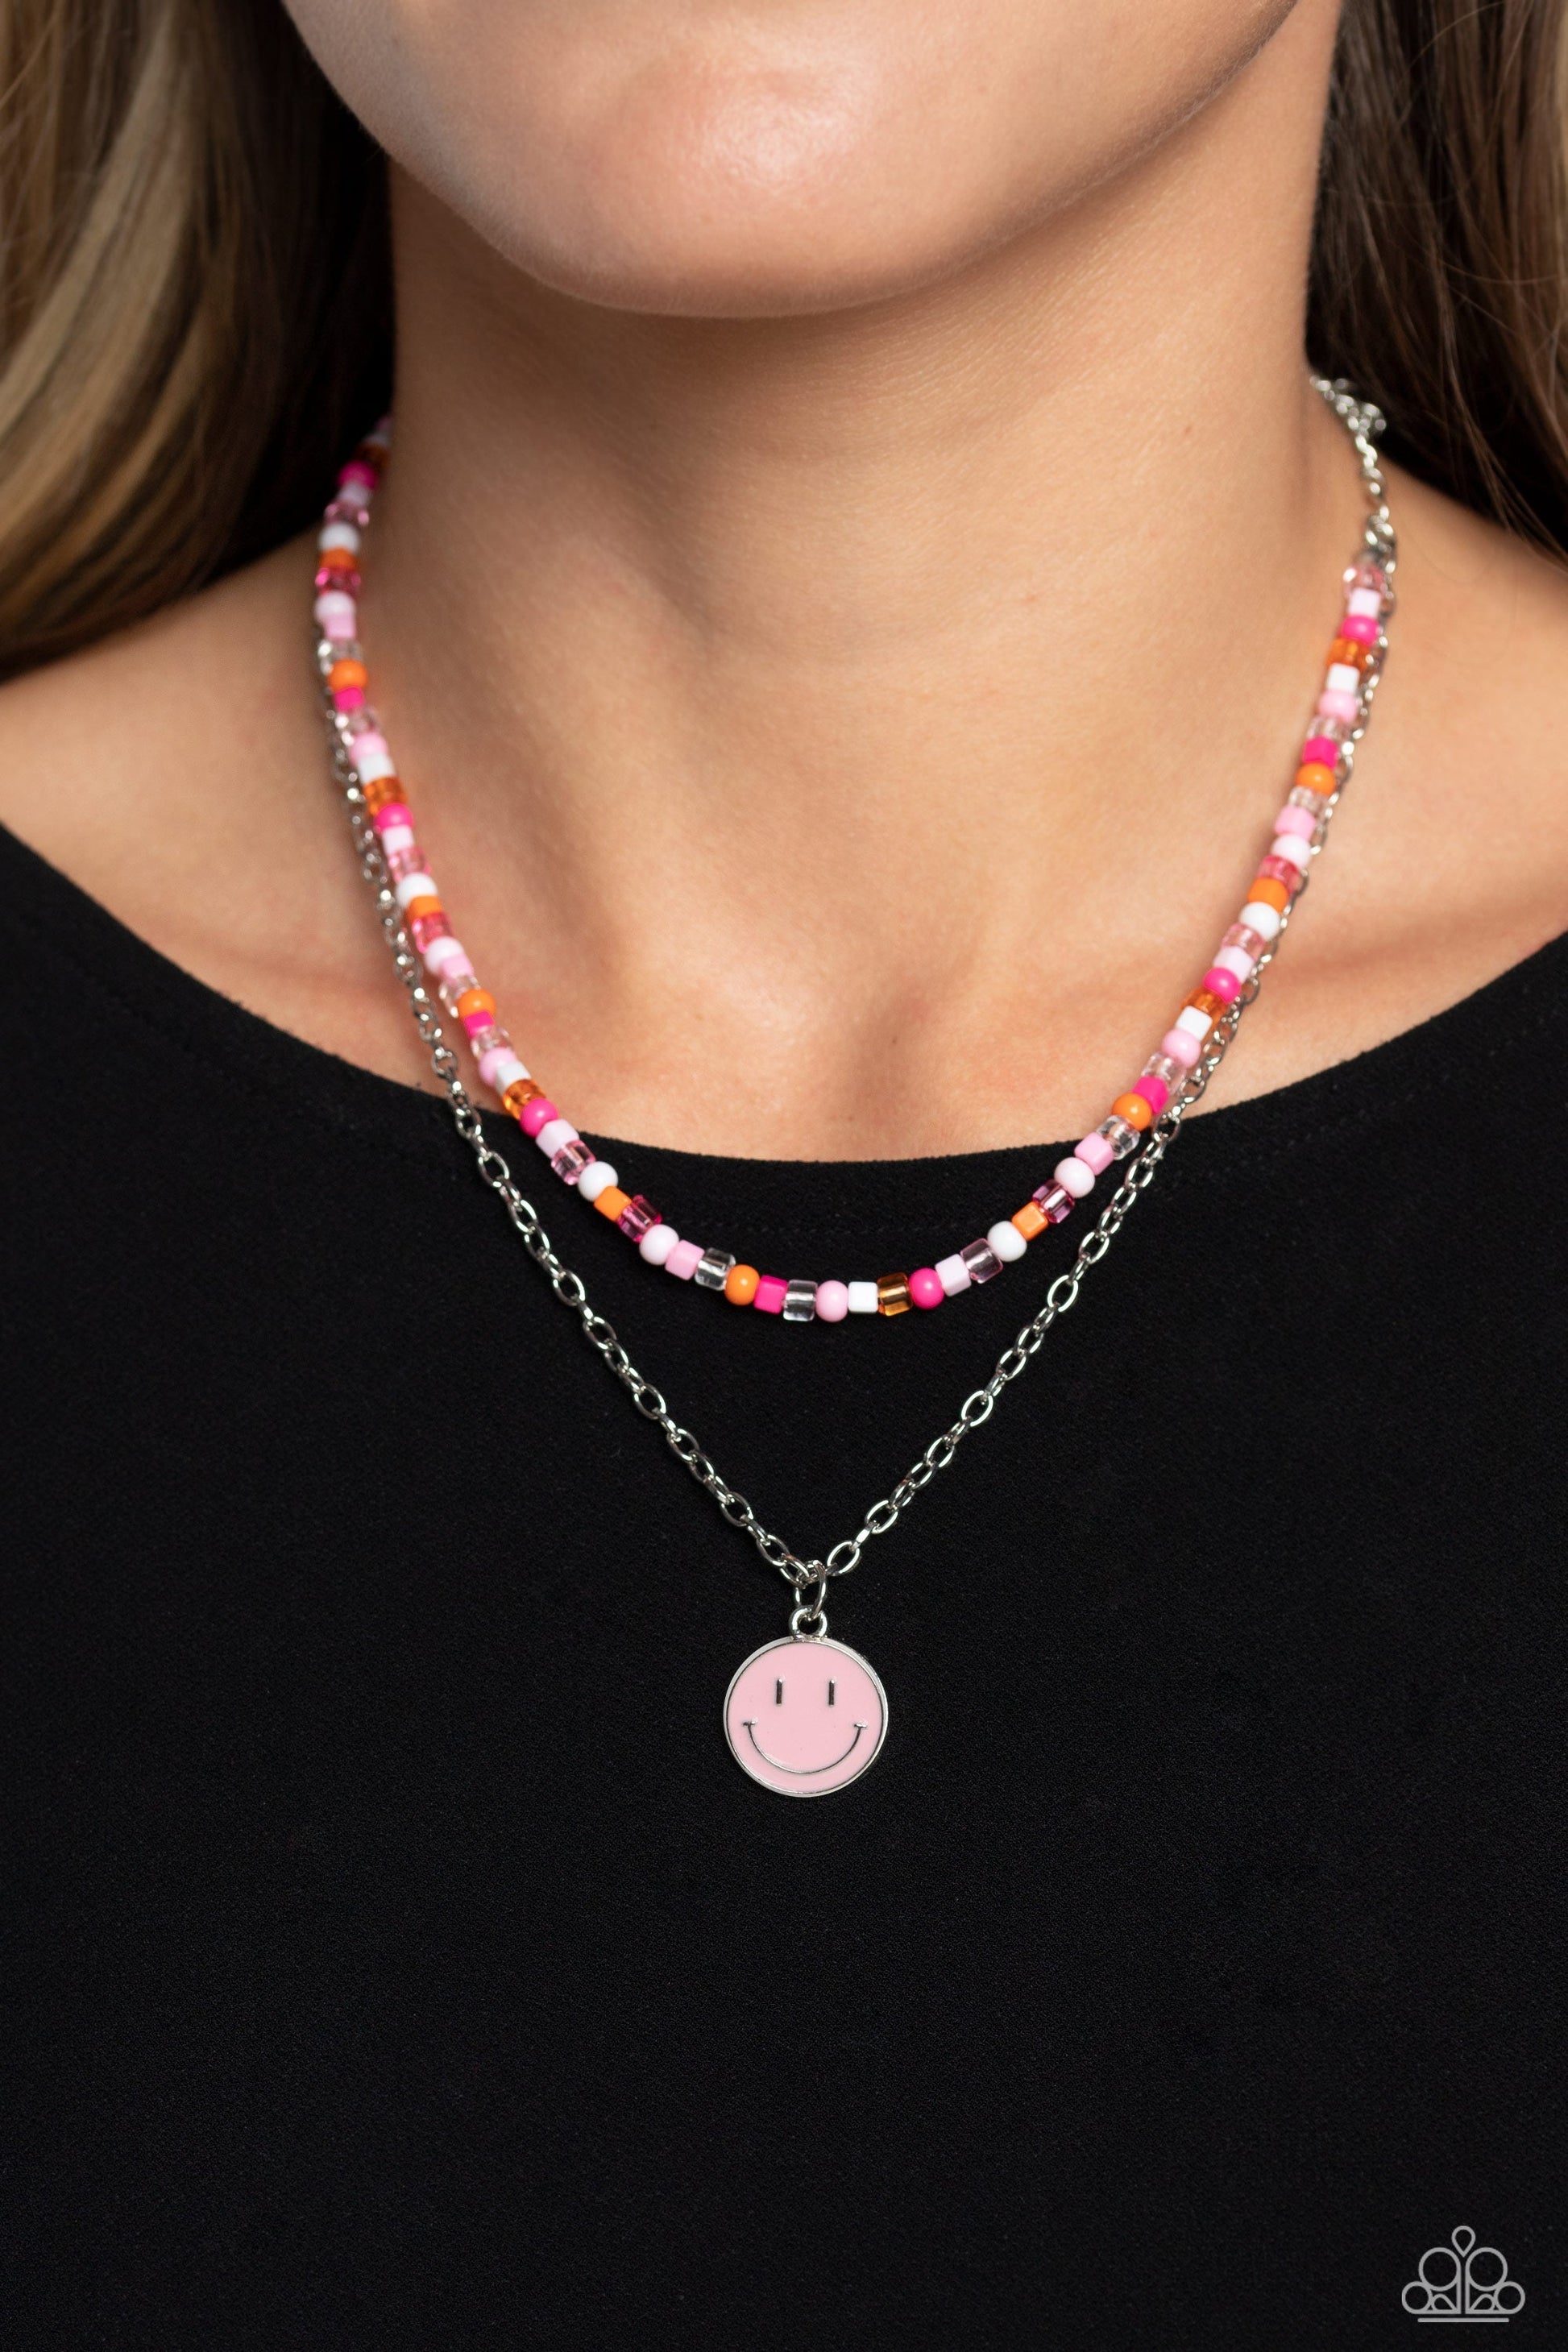 High School Reunion - Pink Seed Bead Necklace - Paparazzi Accessories - Gliding from a dainty, silver chain, a smiley face pendant stands out against a pink backdrop. Completing the charismatic ensemble, a collection of seed beads in shades of light pink, white, pink, orange, and hot pink create bright pops of color around the neckline for a youthful finish.